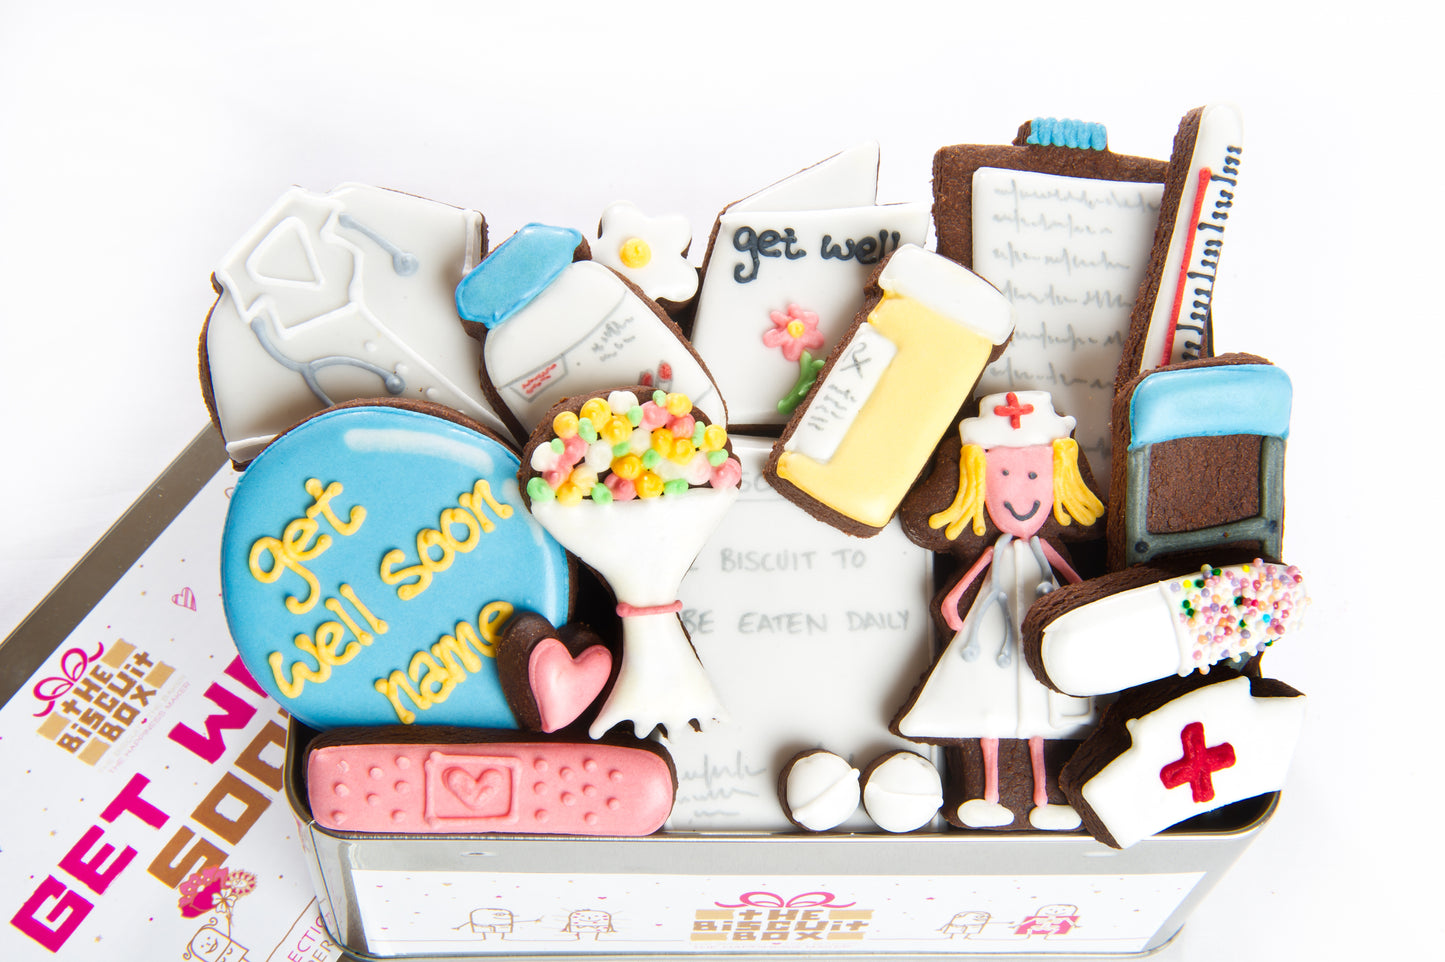 get well soon biscuit tin. hand iced nurse biscuit, prescription biscuit. Mini pills cookies and doctors coat cookies. presented in a get well themed tin.